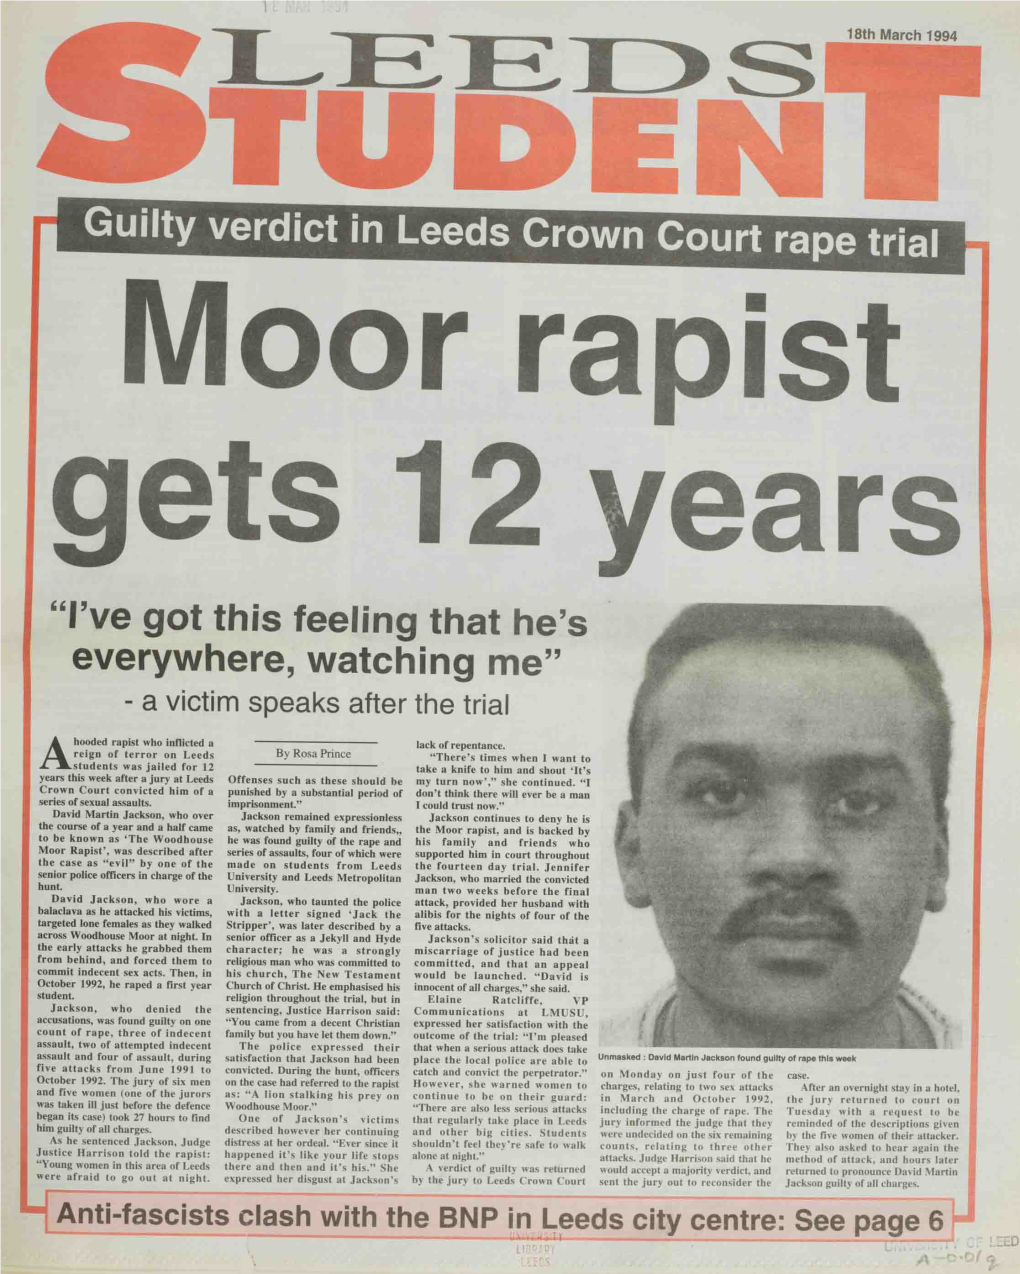 Guilty Verdict in Leeds Crown Court Rape Trial Moor Rapist Gets 12 Years "I've Got This Feeling That He's Everywhere, Watching Me" - a Victim Speaks After the Trial